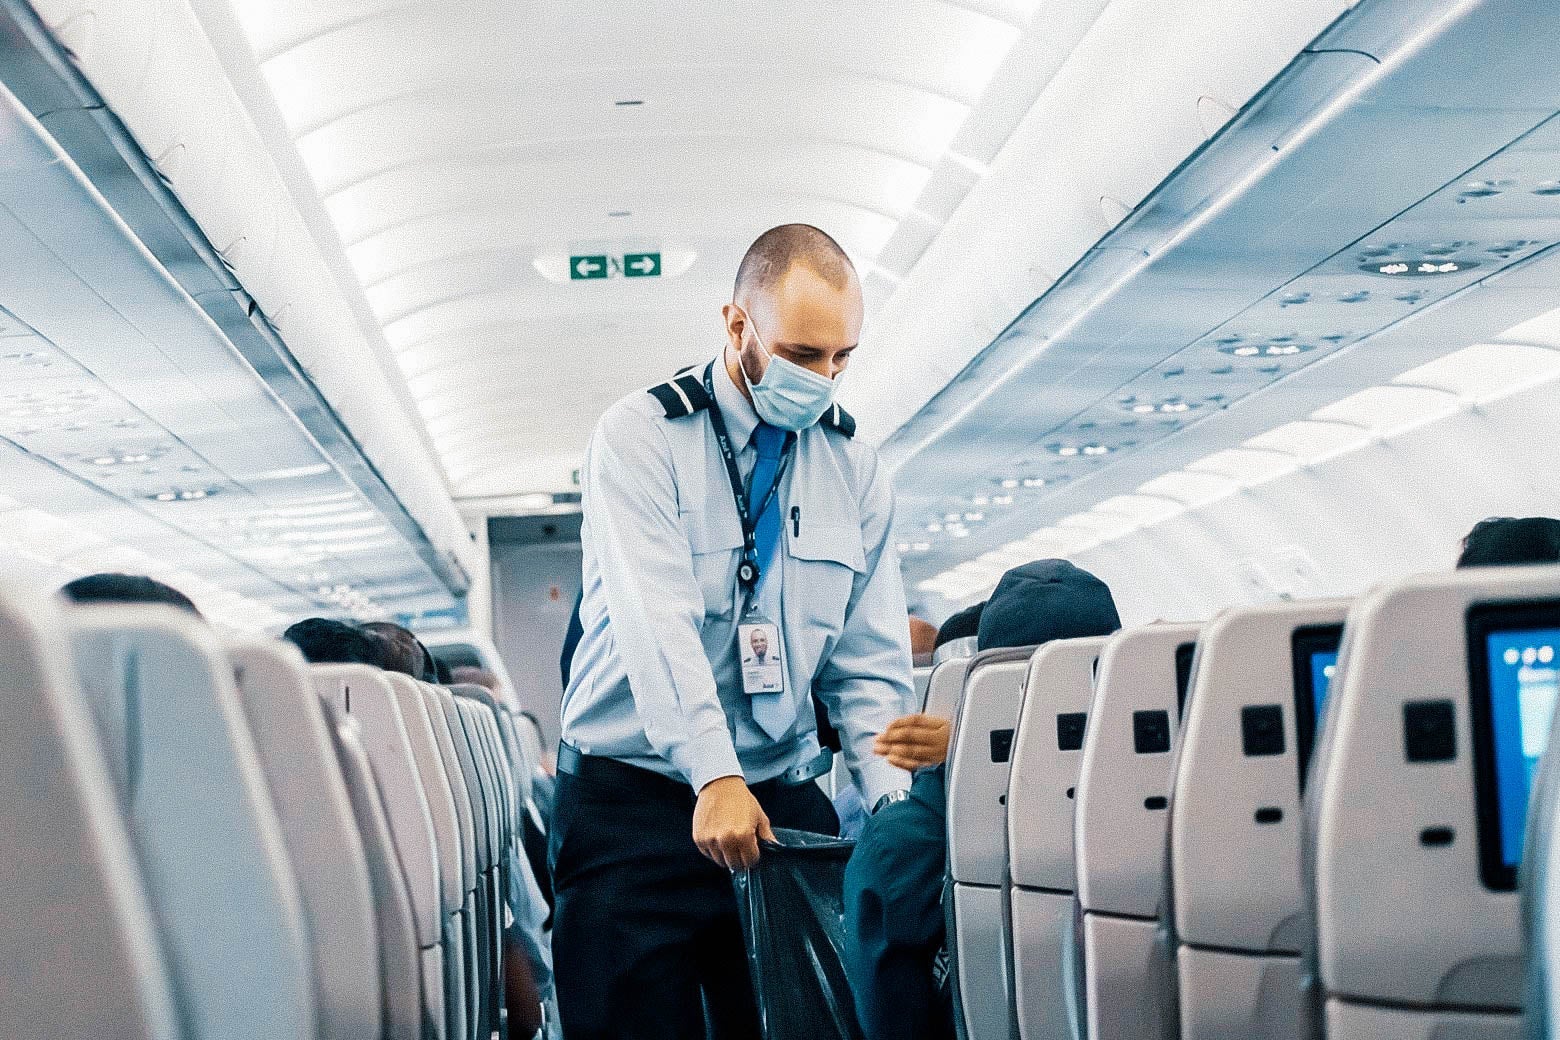 A flight attendant wearing a surgical mask walks down the center aisle of a plane, collecting trash from passengers